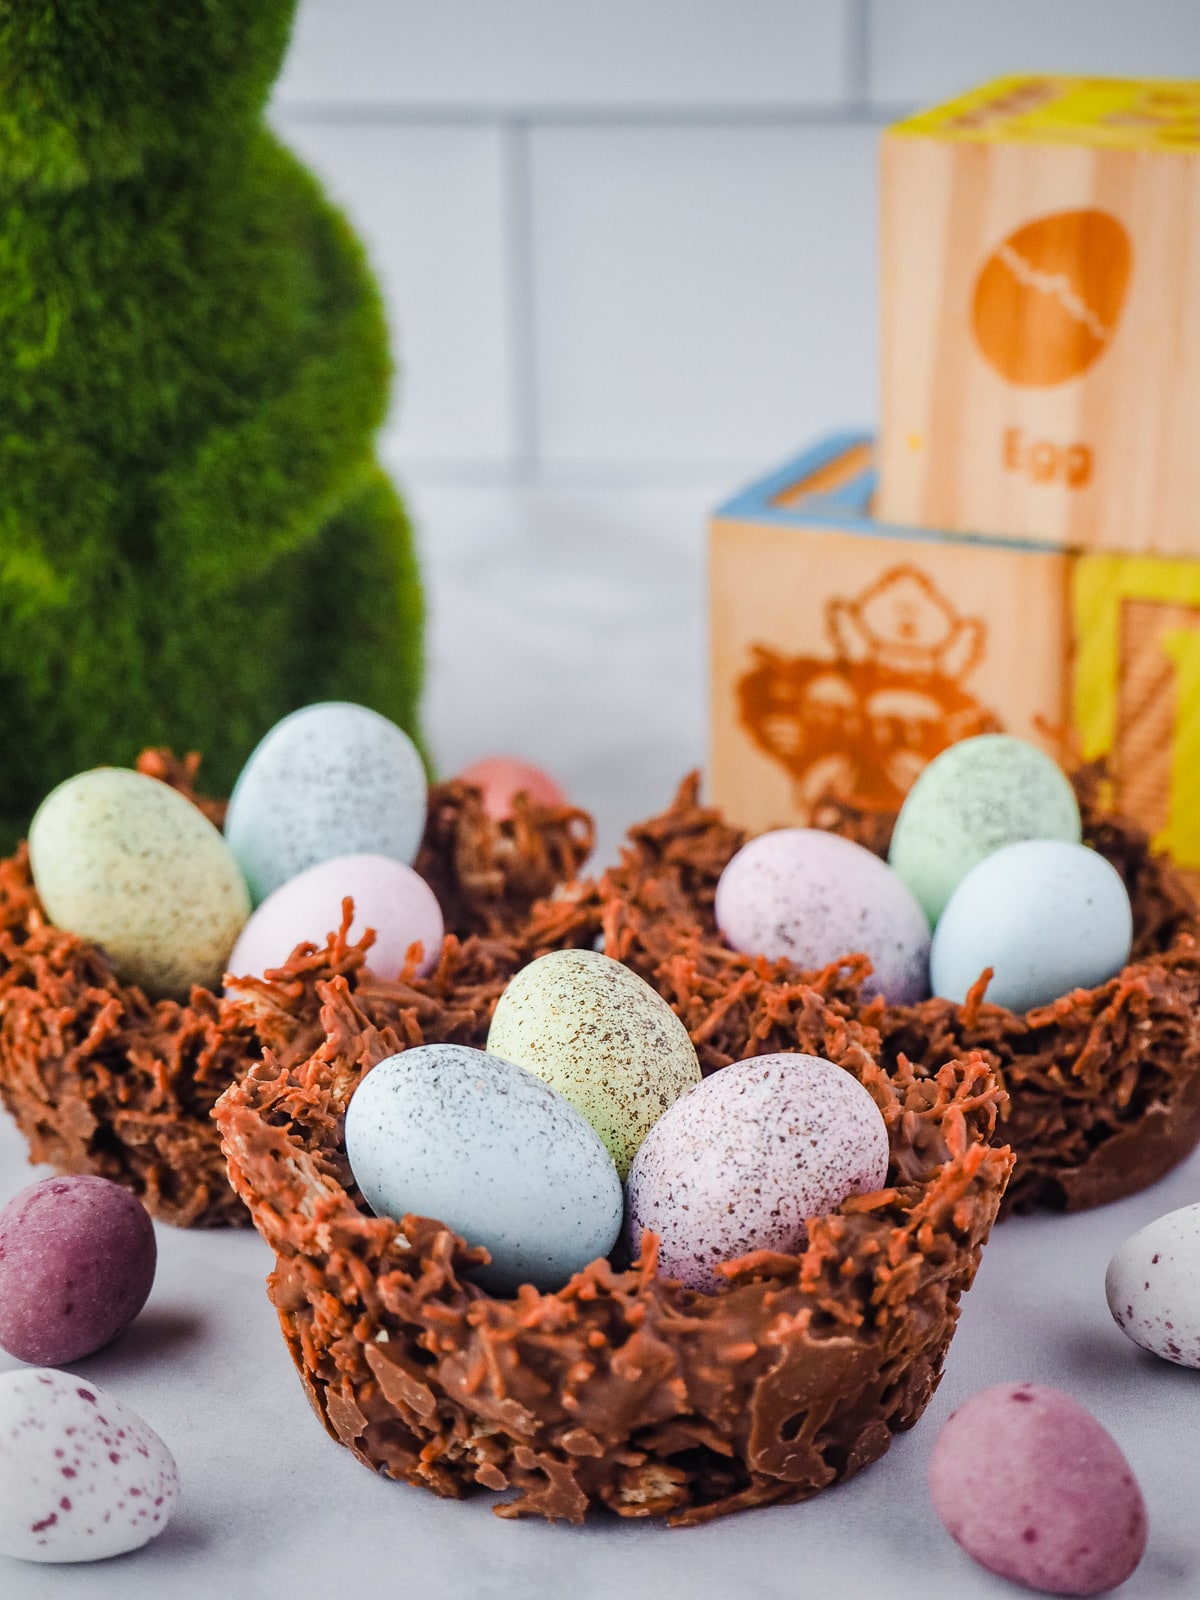 Nests surrounded by mini eggs, with bunny and Easter blocks in background.